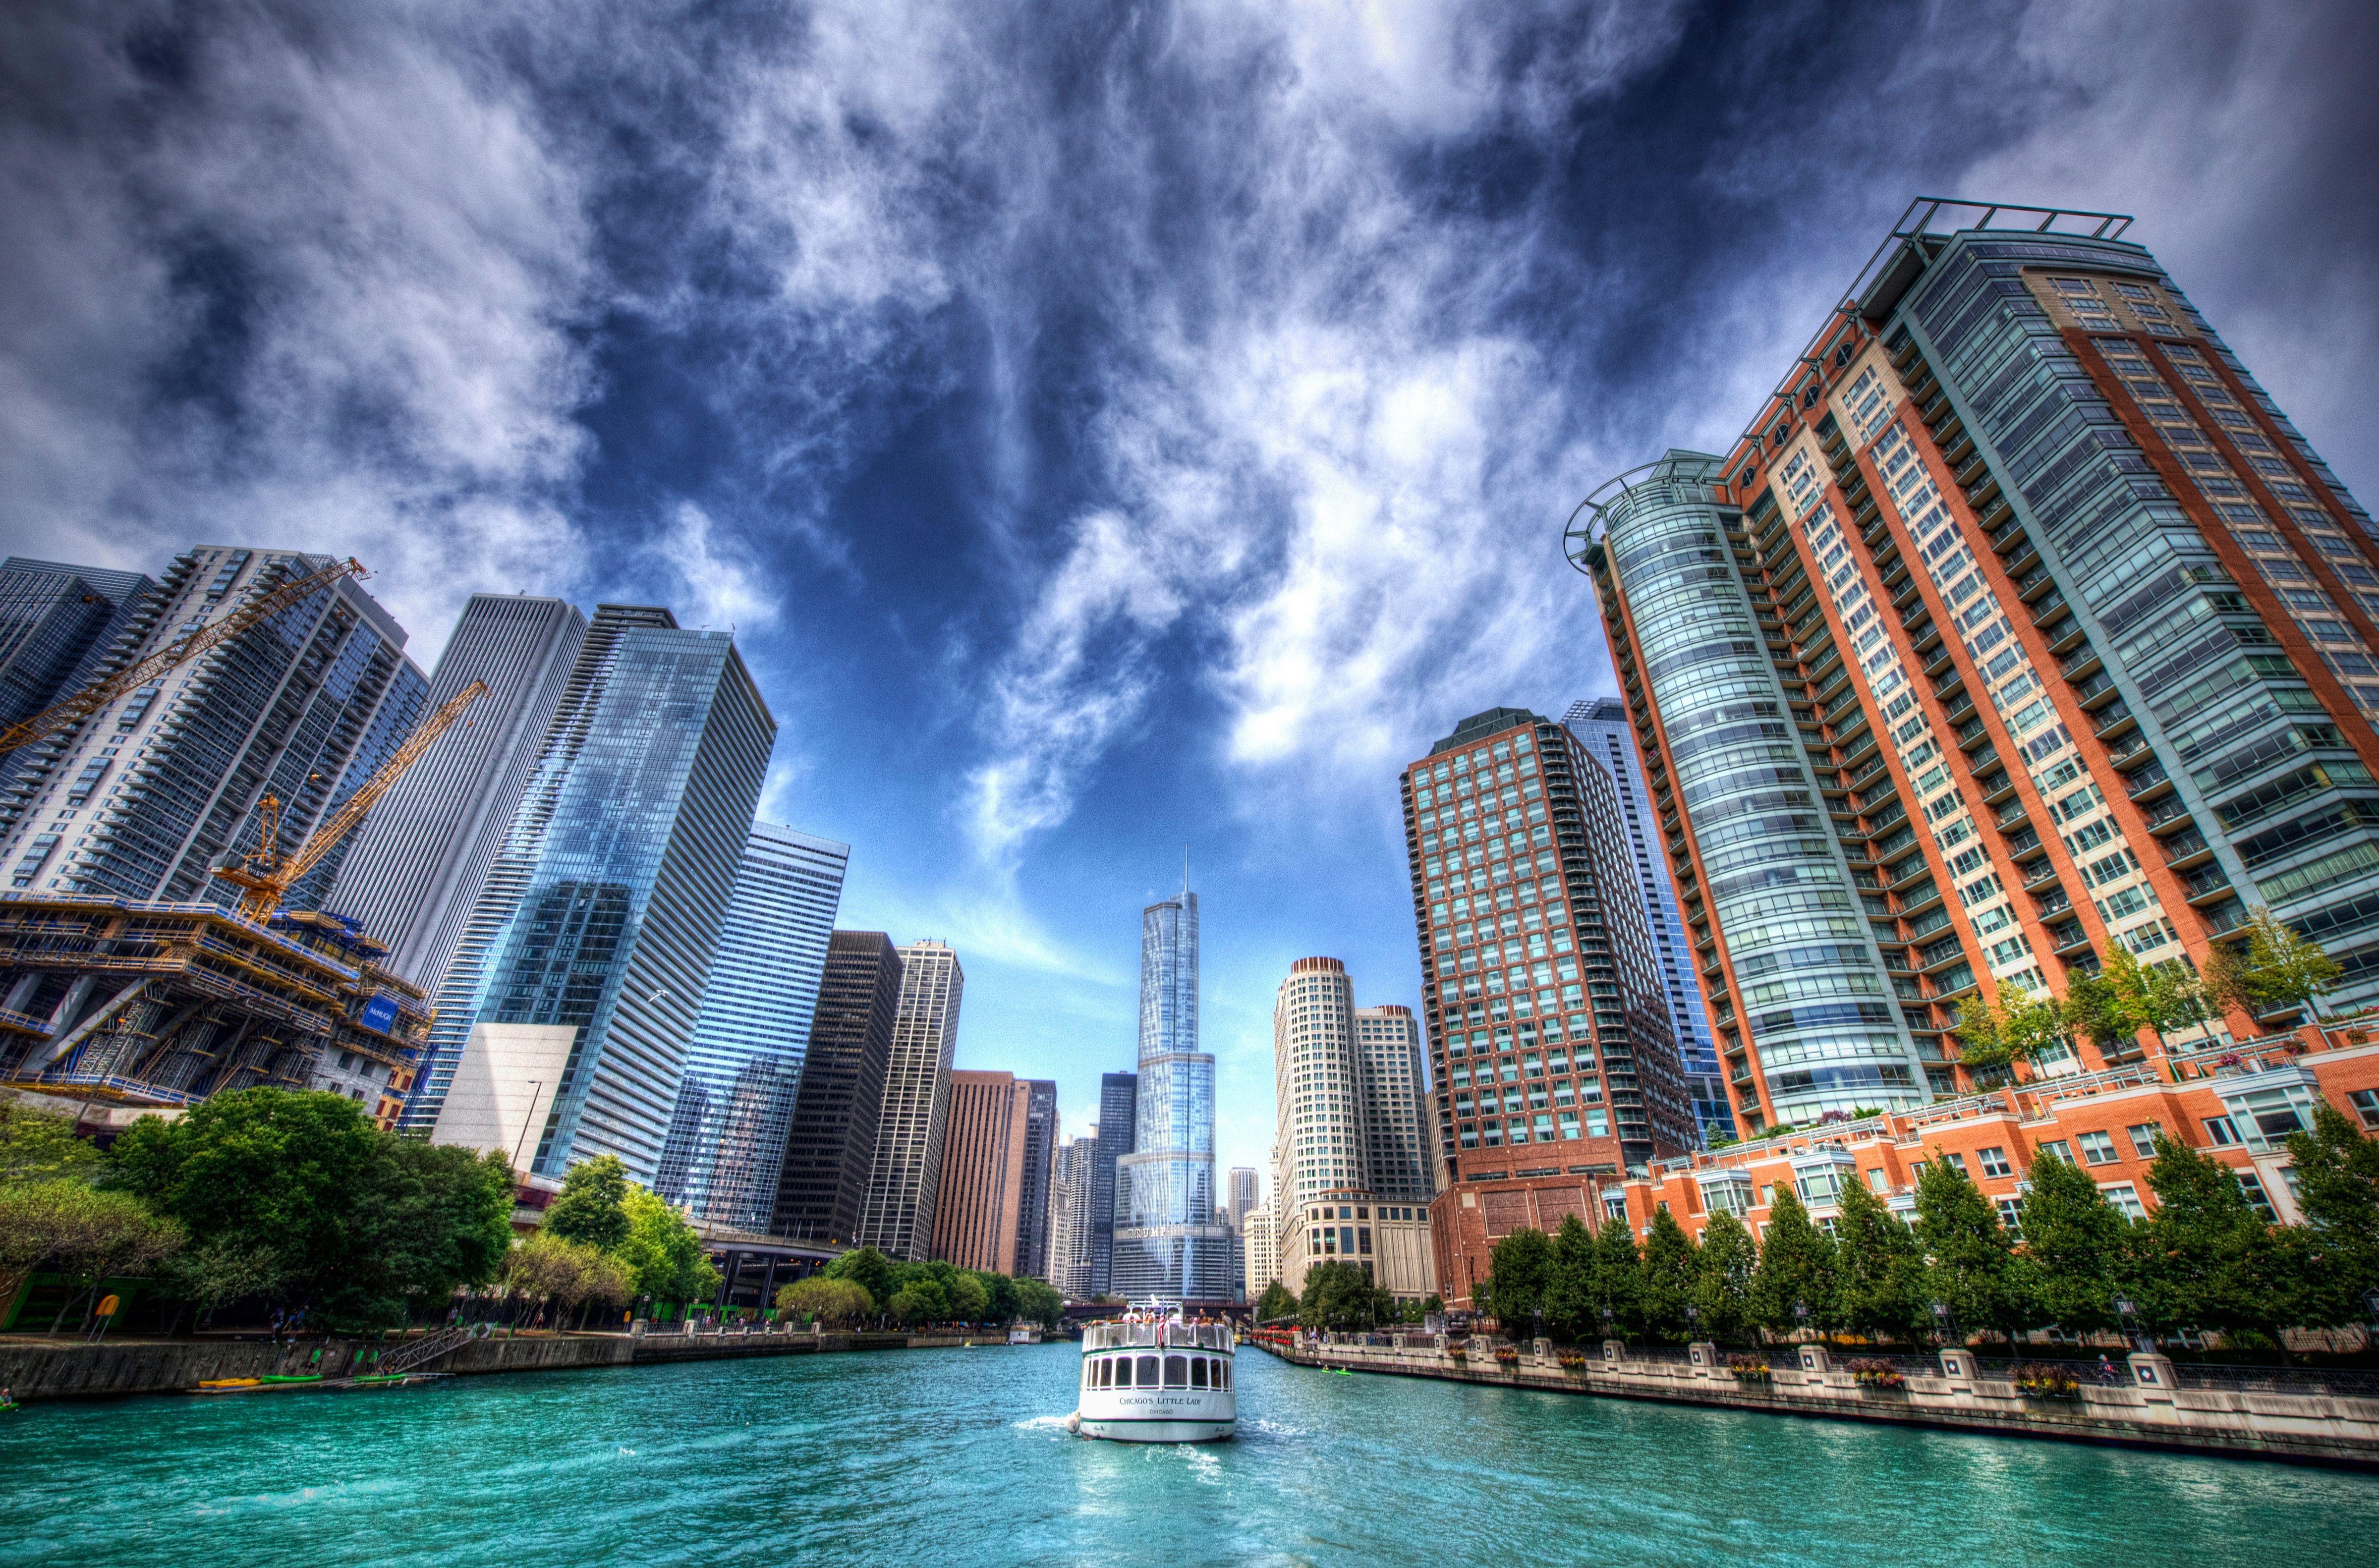 Chicago 4k Wallpapers Top Free Chicago 4k Backgrounds Wallpaperaccess